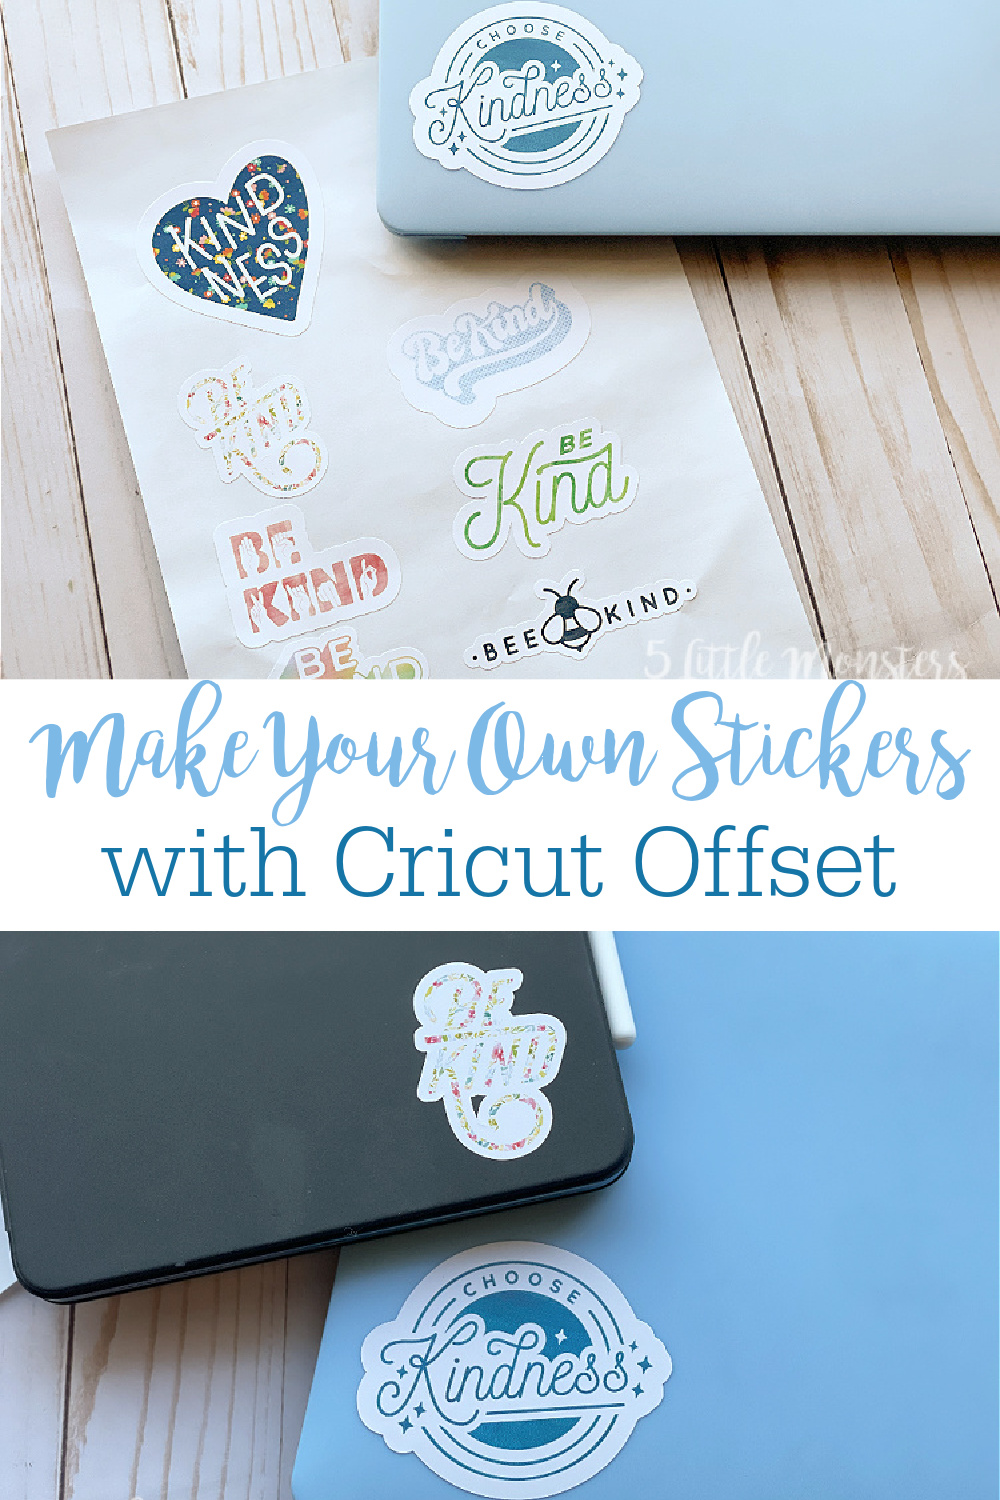 5 Little Monsters: How to Make Stickers with Cricut's New Offset Feature